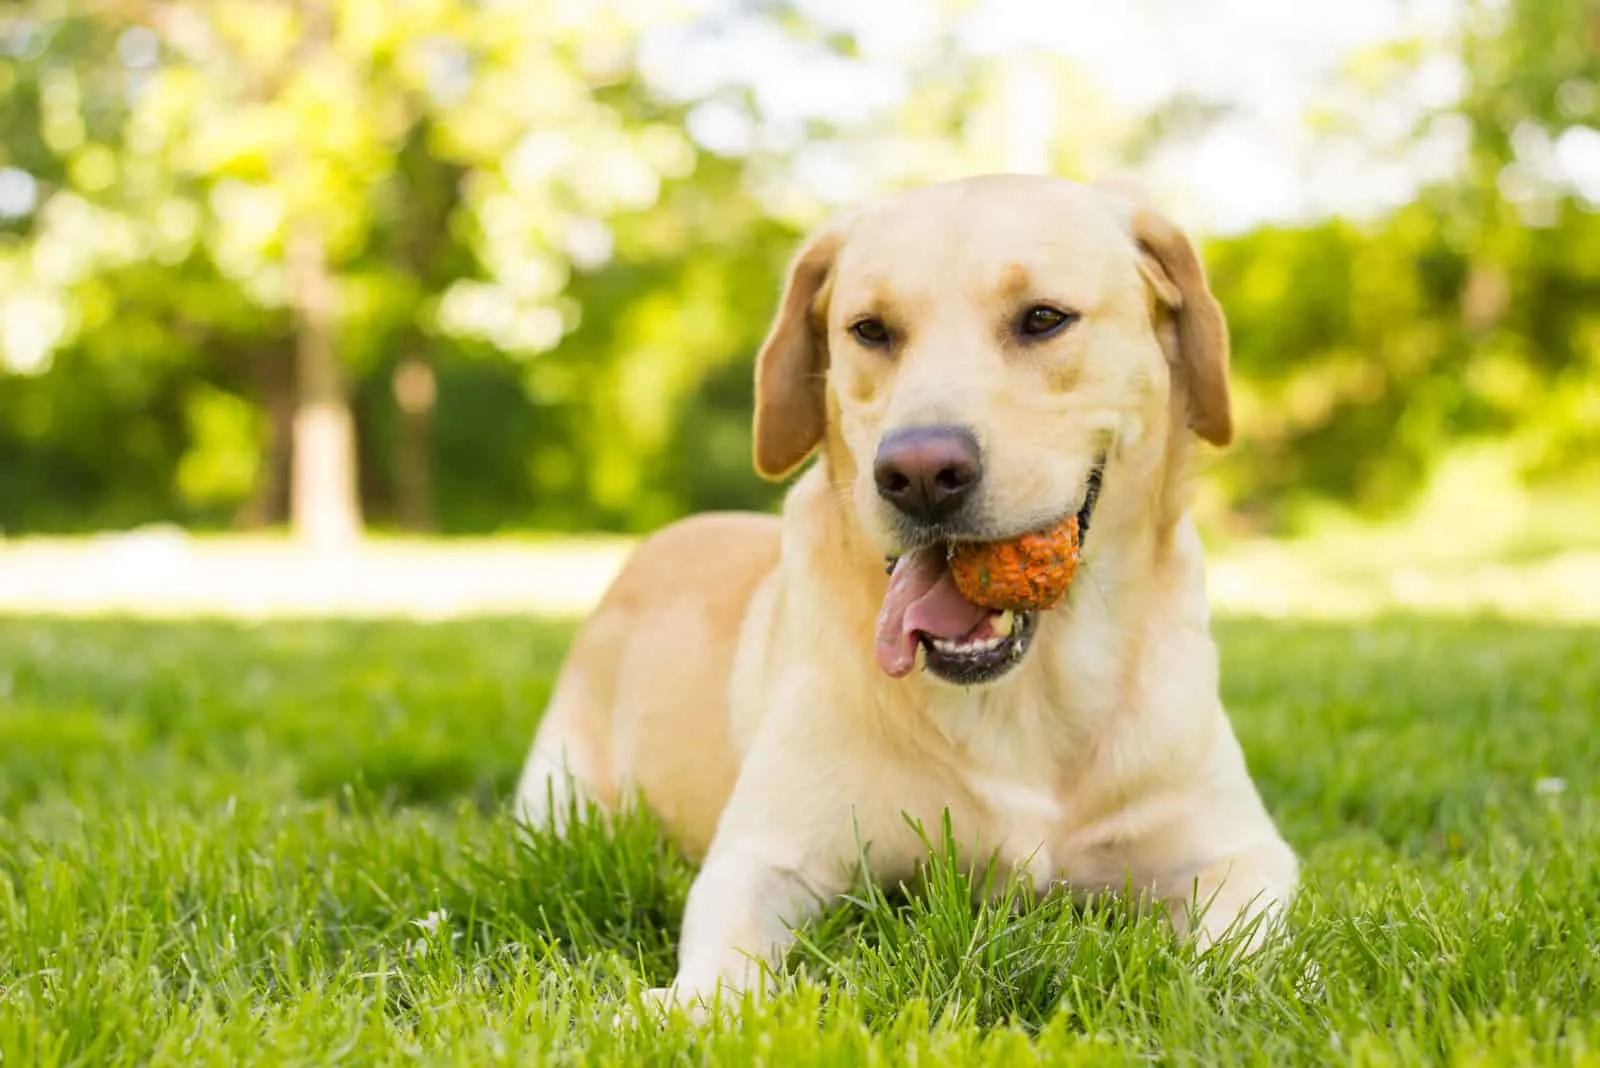 the labrador lies in the grass and plays with the ball